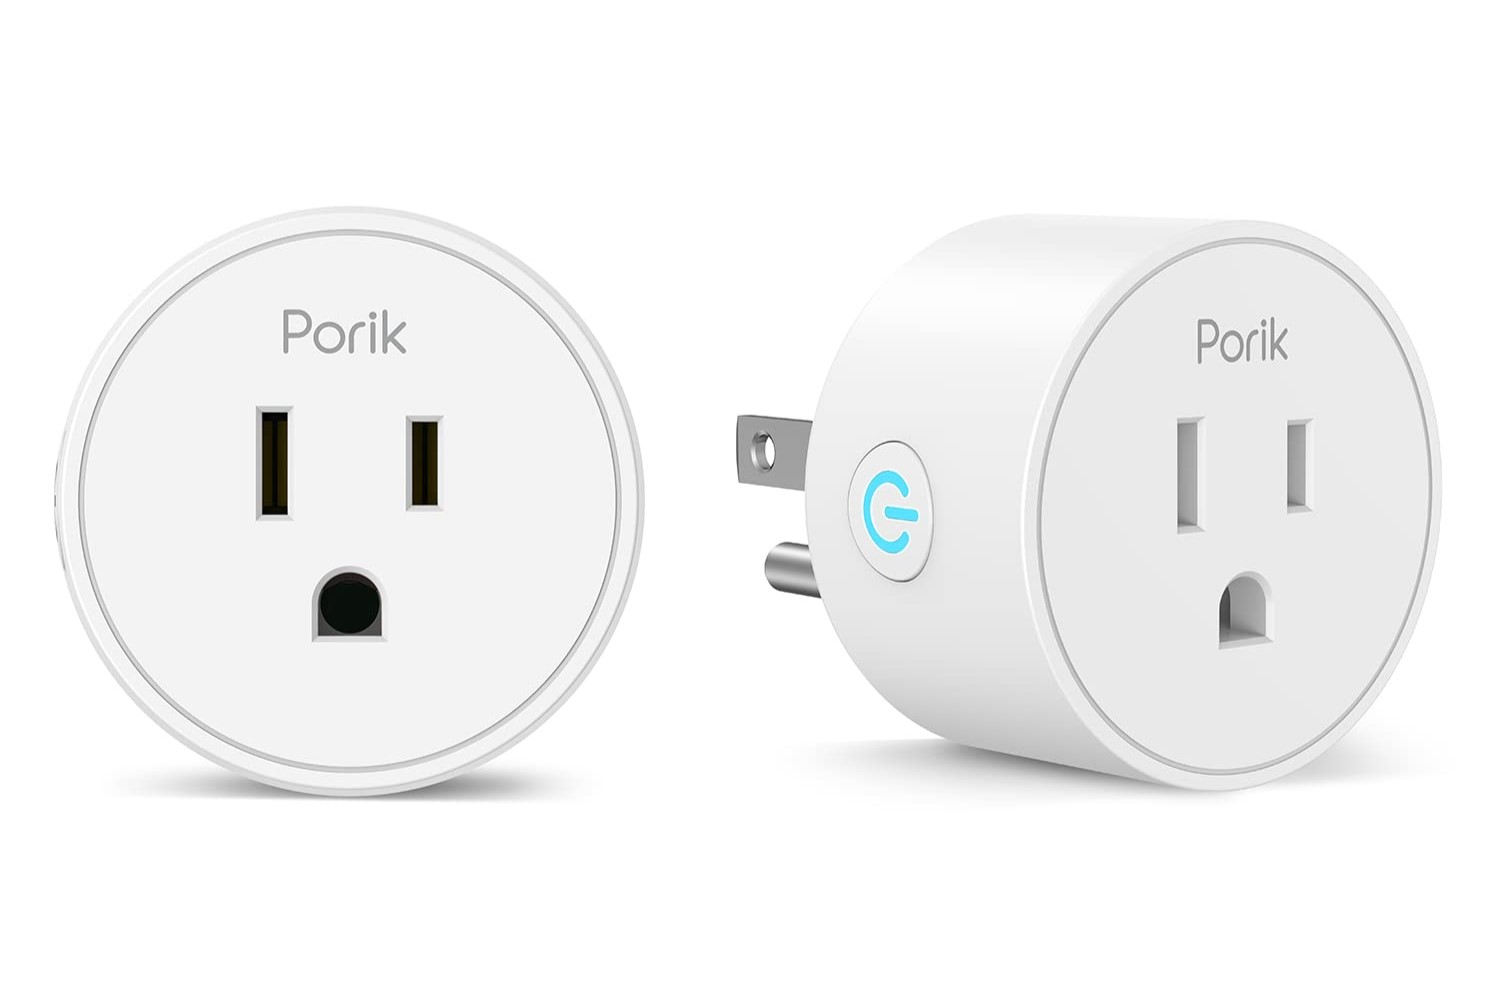 Govee Smart Plug 15A, WiFi Bluetooth Outlets 2 Pack Work with Alexa and  Google Assistant, WiFi Plugs with Multiple Timers, Govee Home APP Group  Control Remotely, No Hub Required, ETL&FCC Certified 